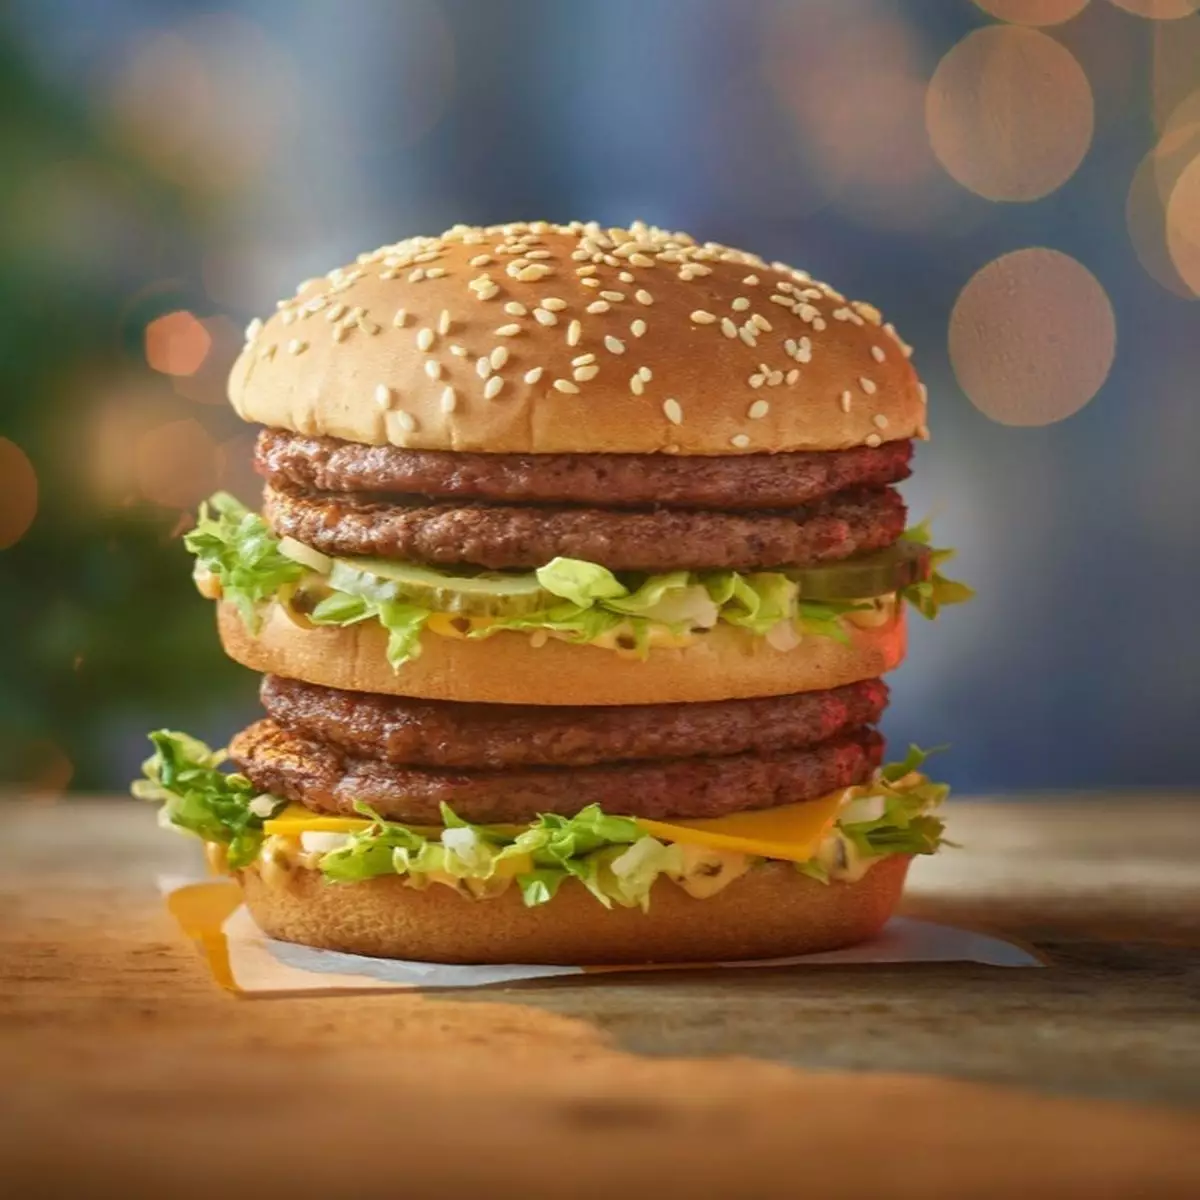 The Double Big Mac is available now (